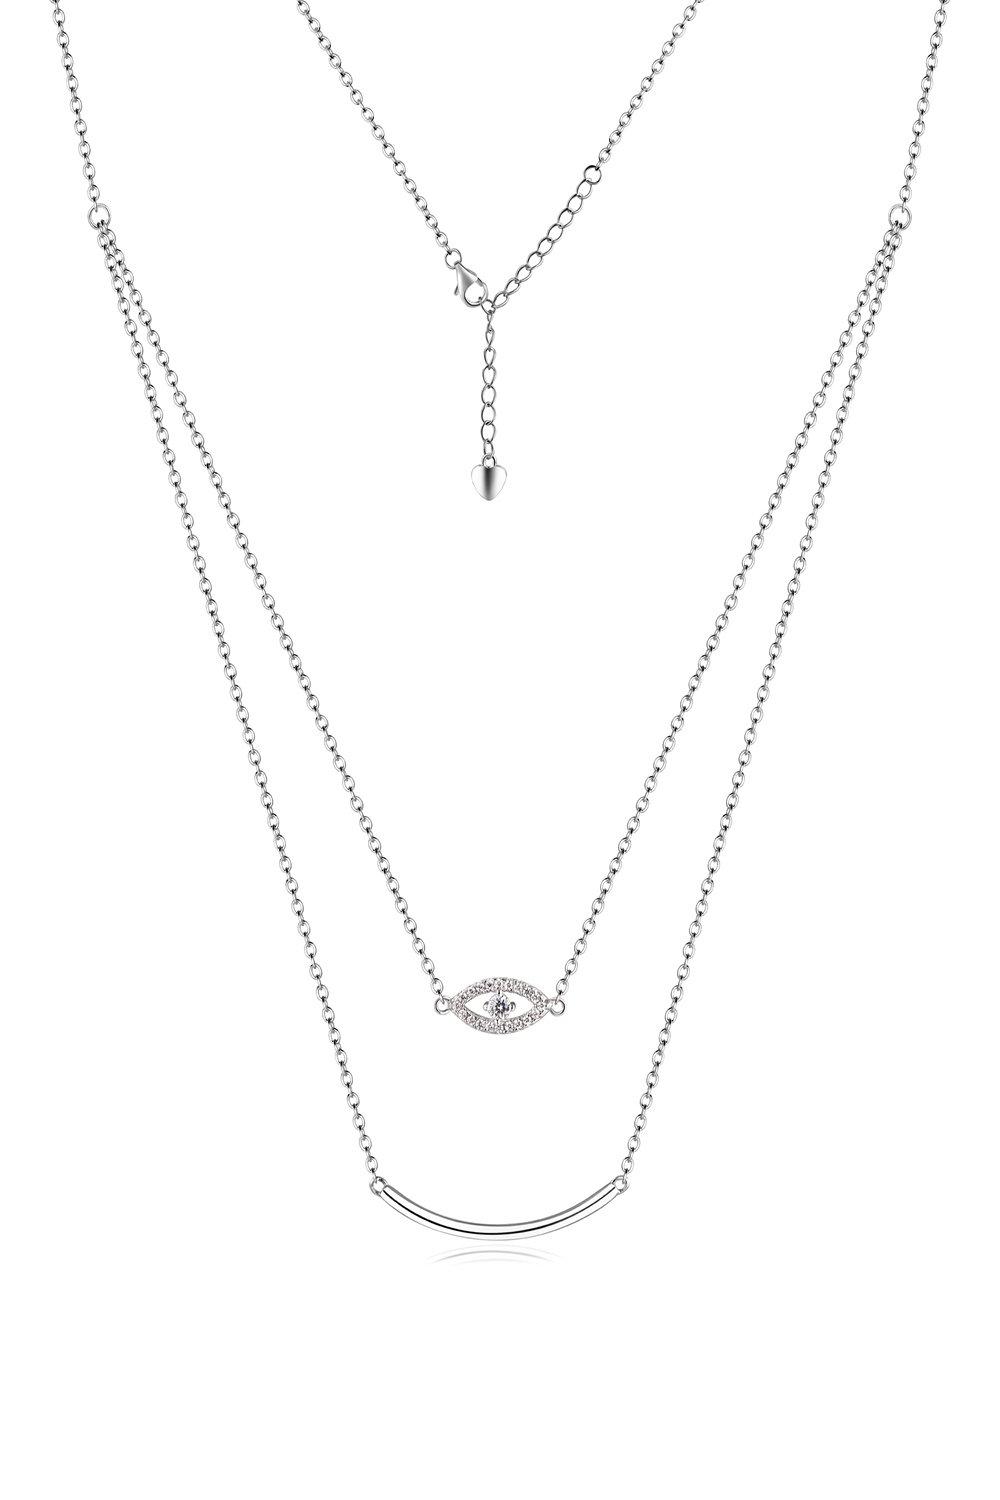 sterling silver rhodium plated layered cz necklace - sterling silver/rhodium plated - womens